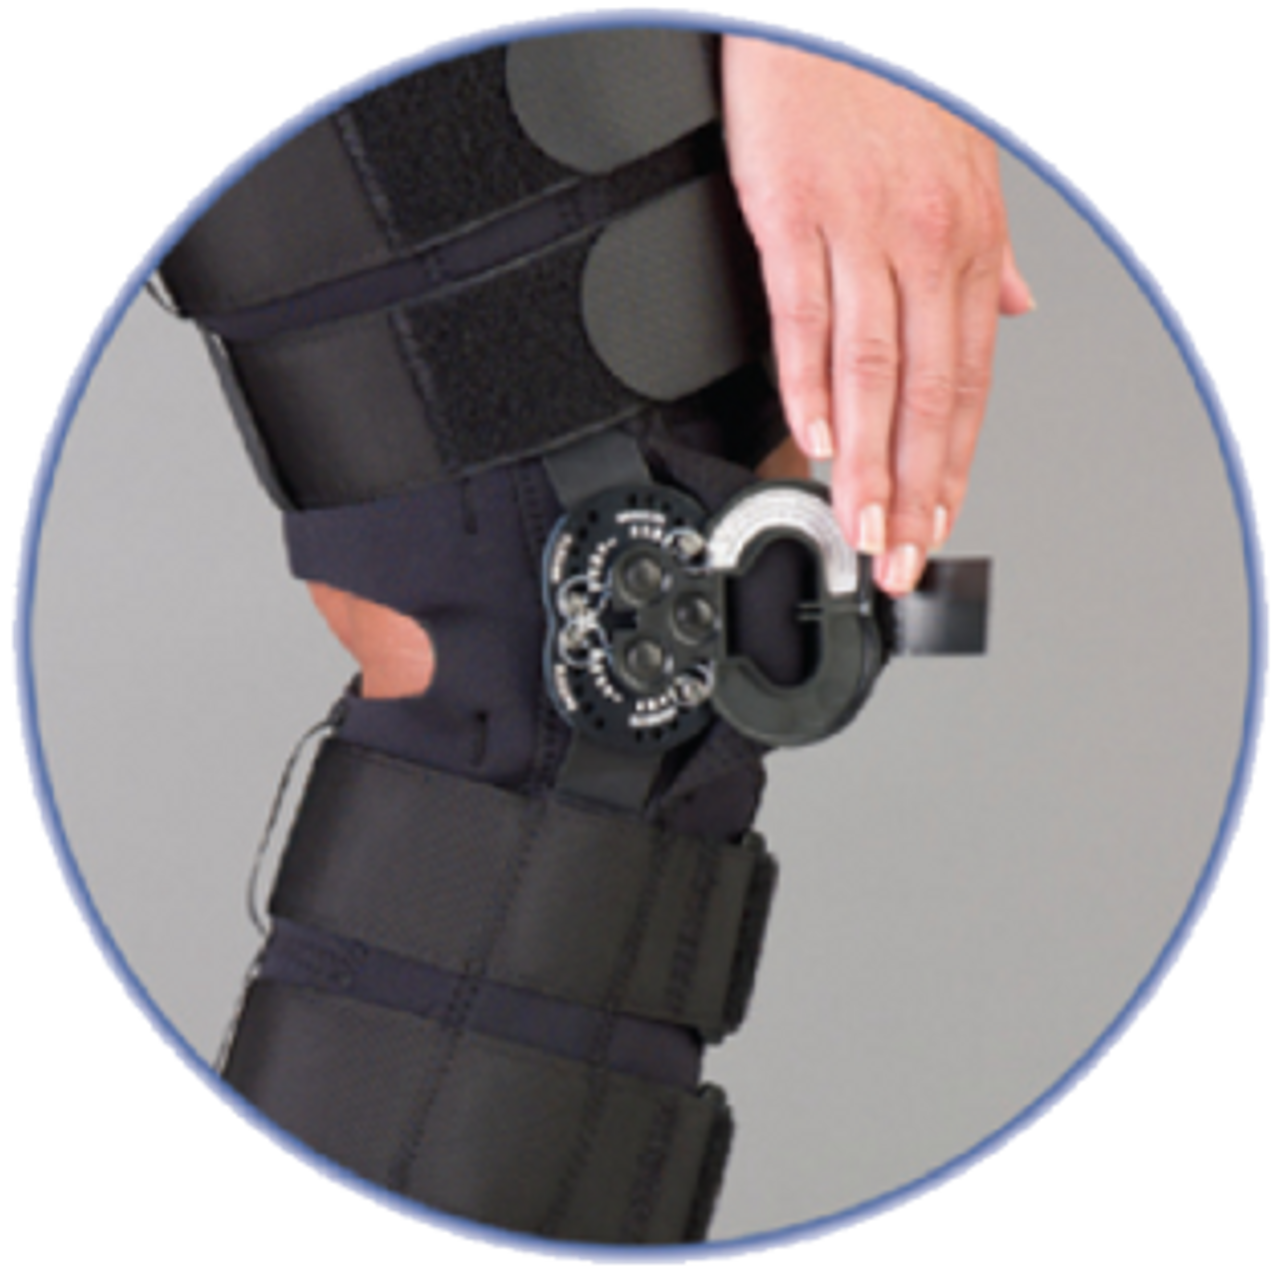 GRIPPER 16" HINGED KNEE WITH RANGE OF MOTION HINGES "COOLFLEX" - SM, 117142